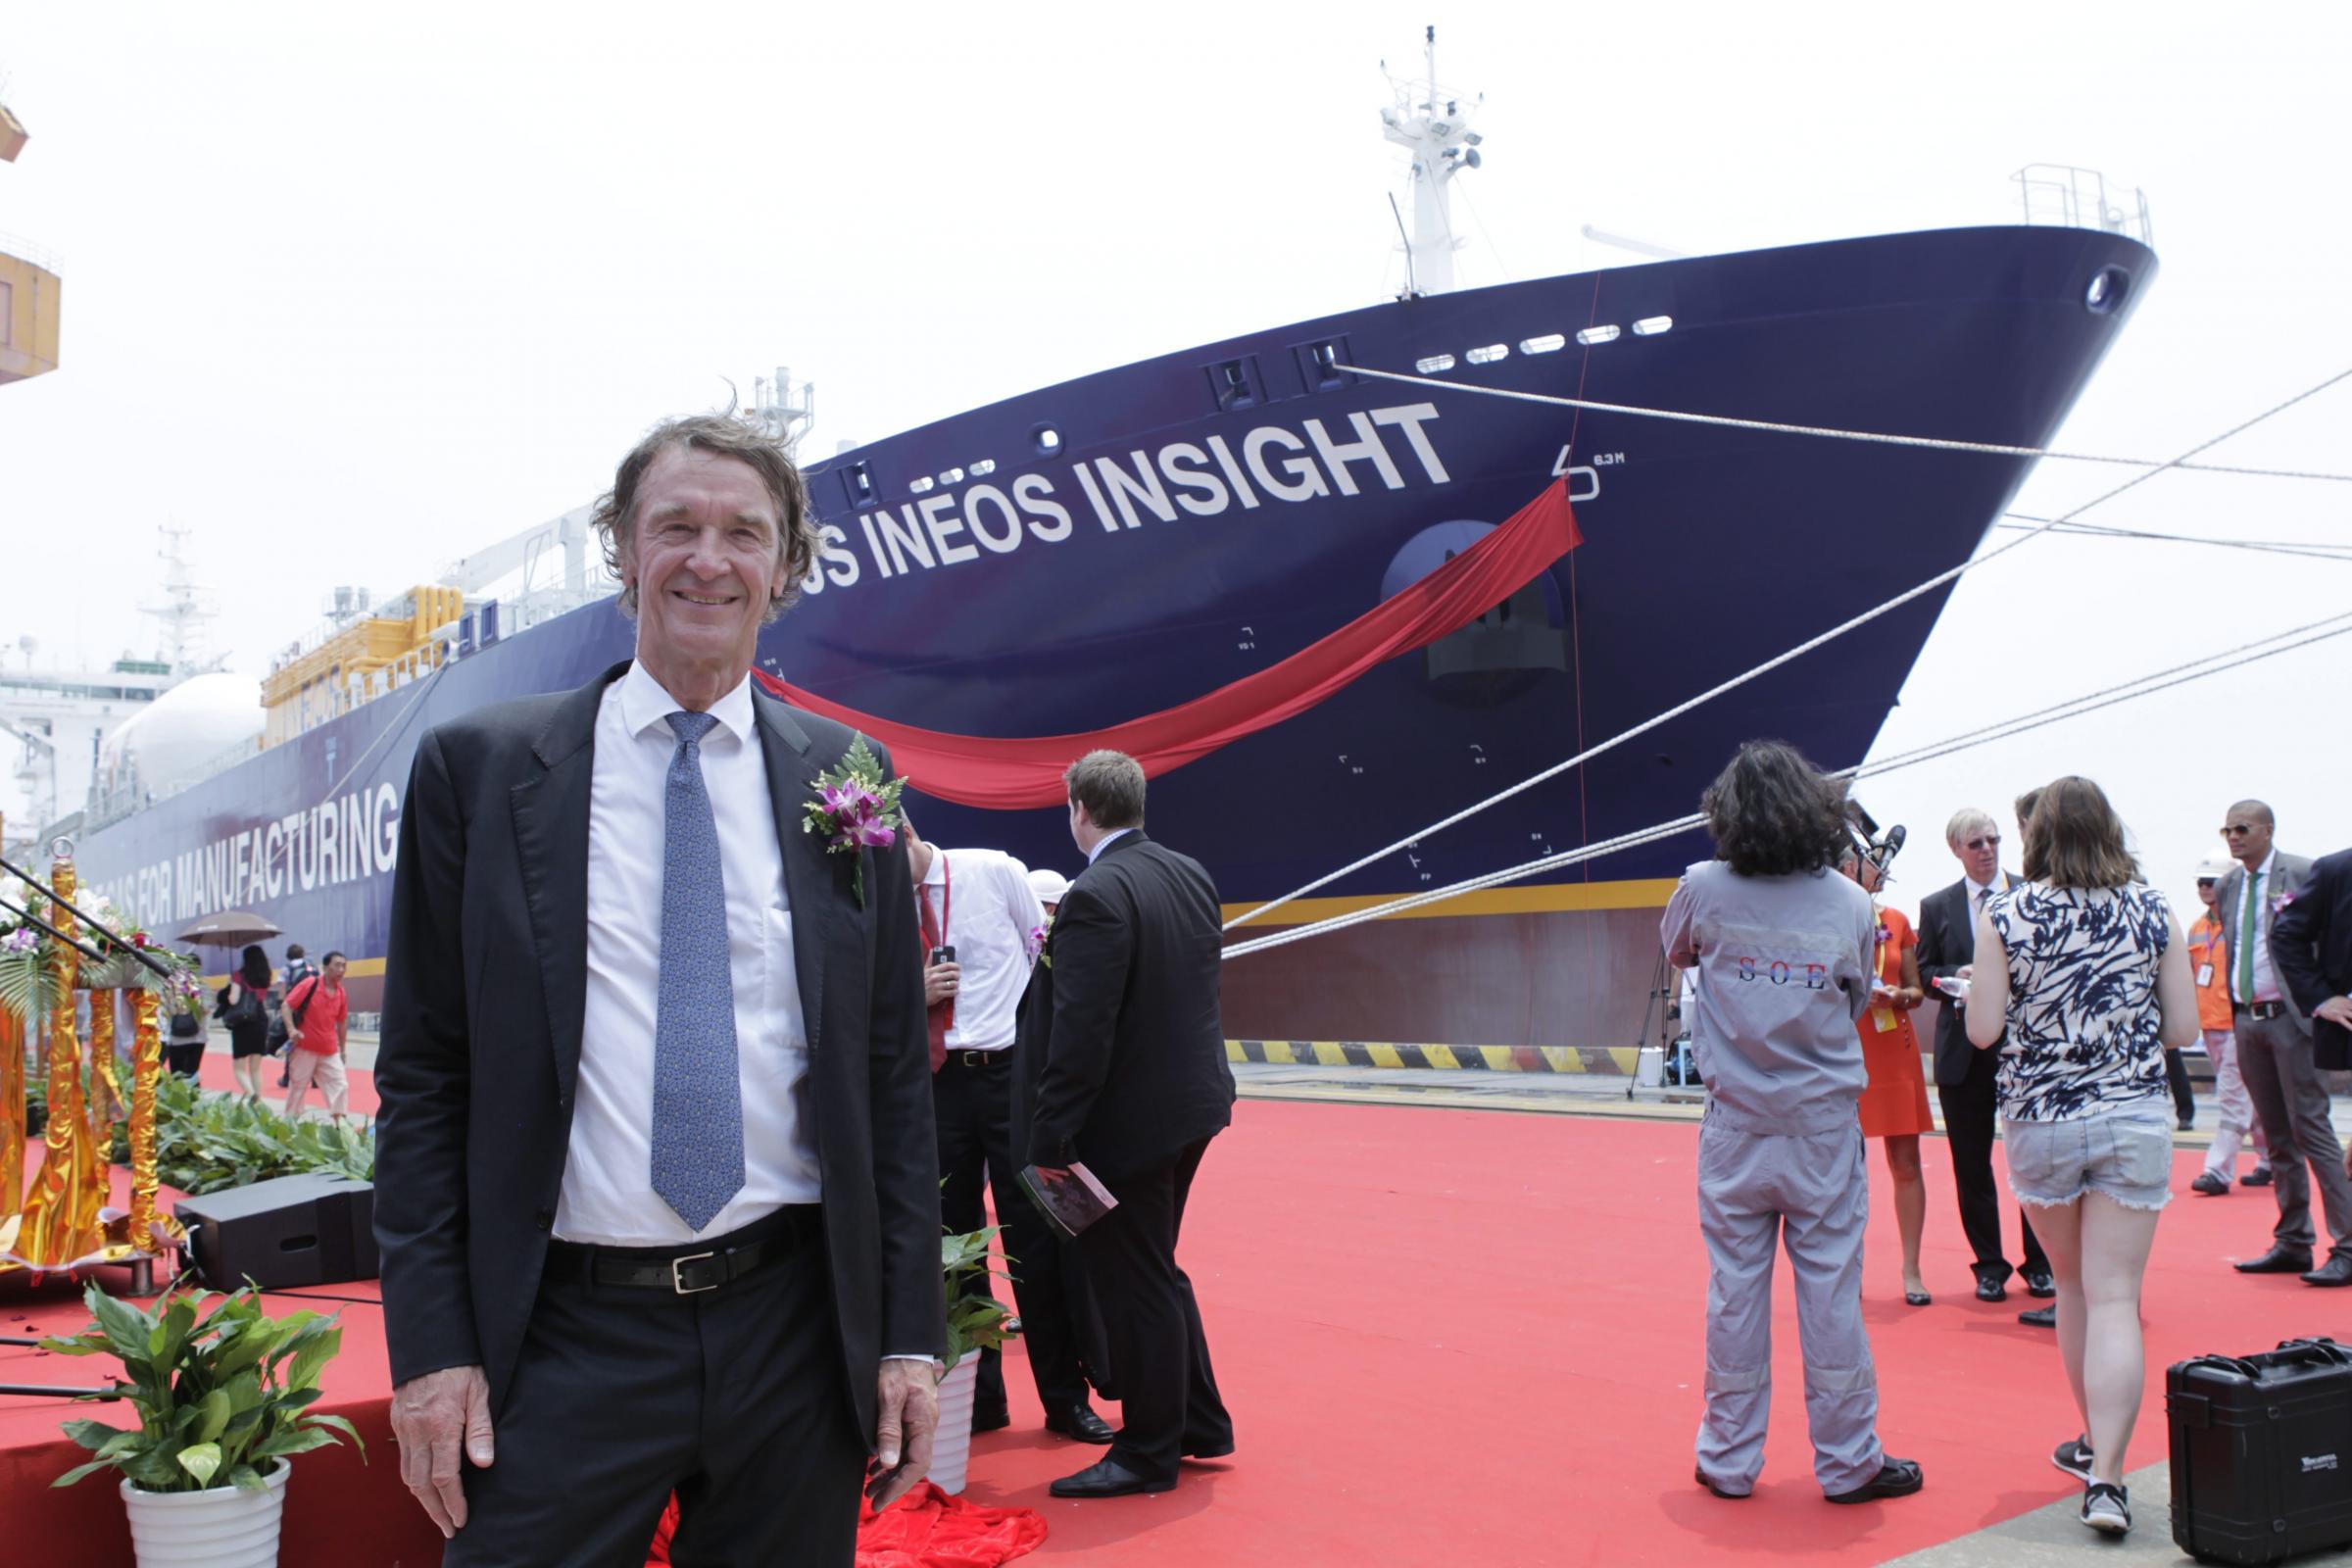 INEOS boss Jim Ratcliffe with one of the giant purpose-built Ineos ships that will transport fracked gas from America to Scotland